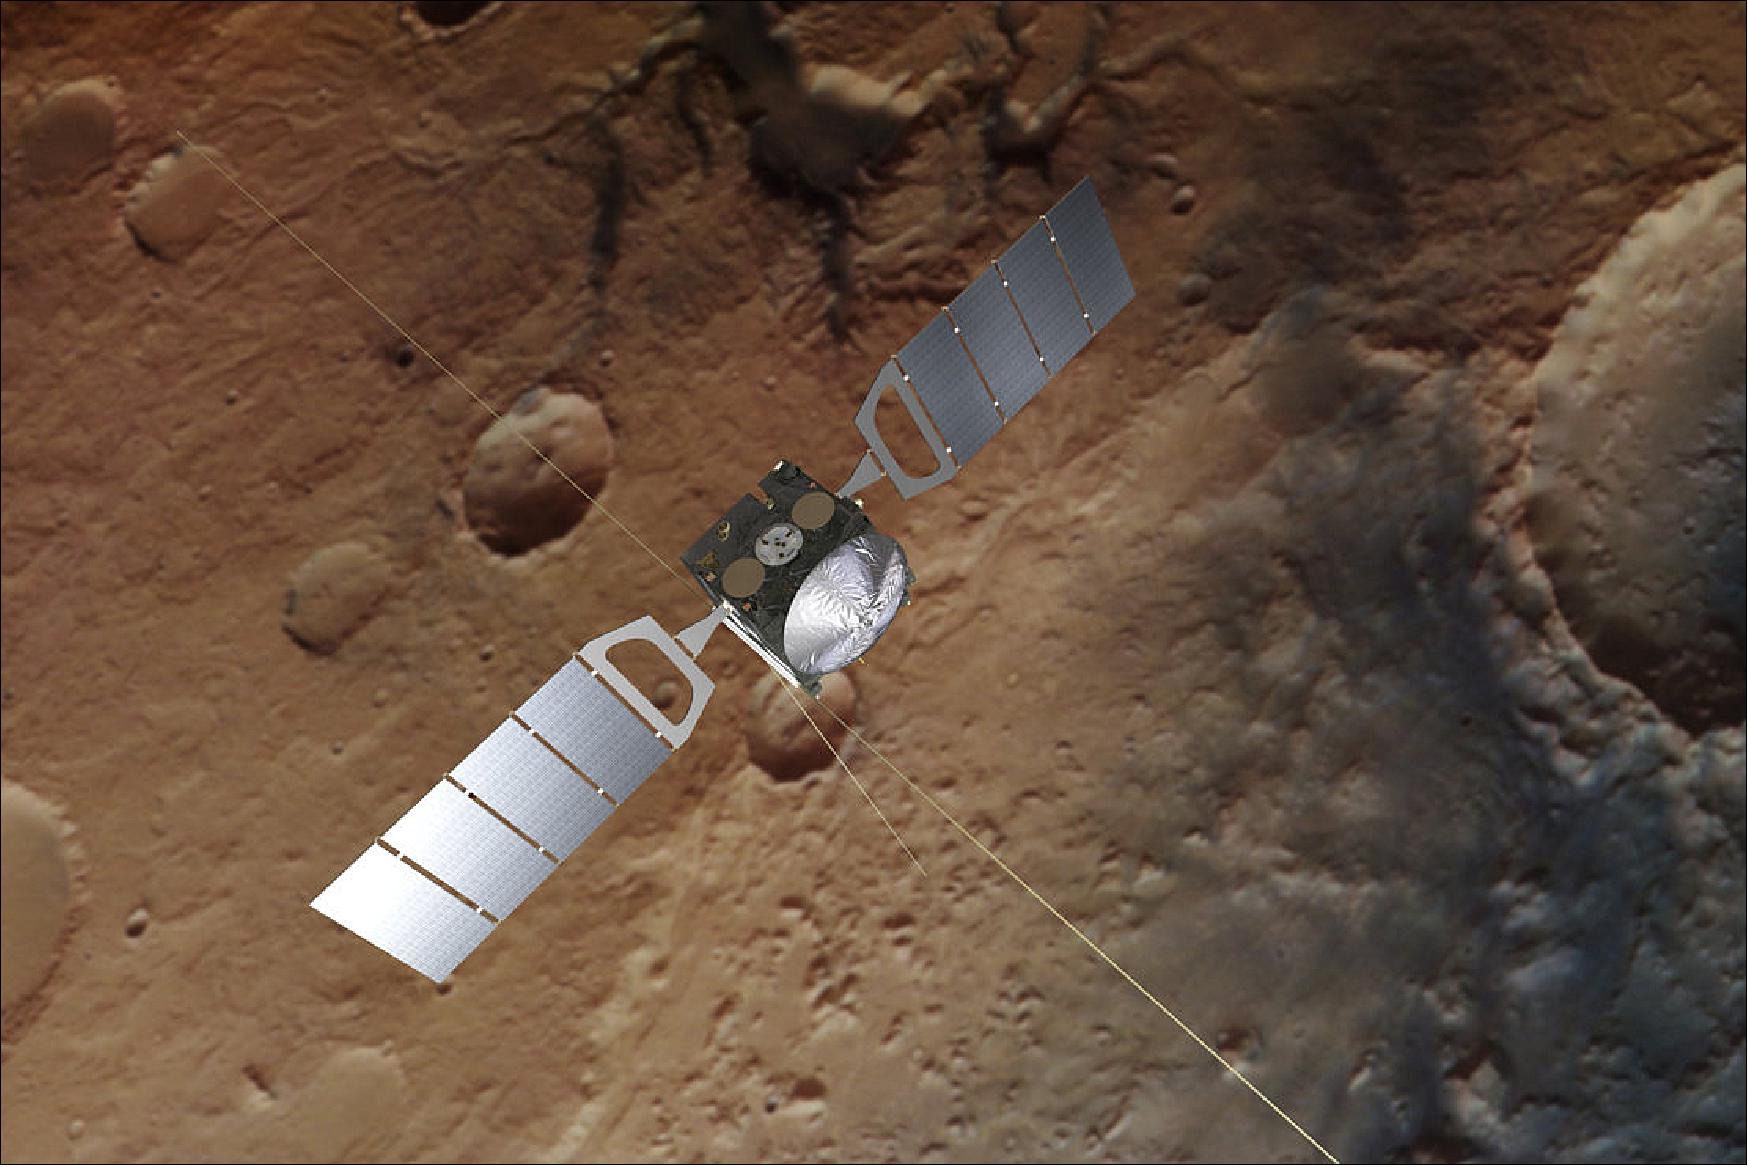 Figure 82: Artist's impression of Mars Express. The background is based on an actual image of Mars taken by the spacecraft's HRSC (image credit: ESA/ATG medialab; Mars: ESA/DLR/FU Berlin, CC BY-SA 3.0 IGO)